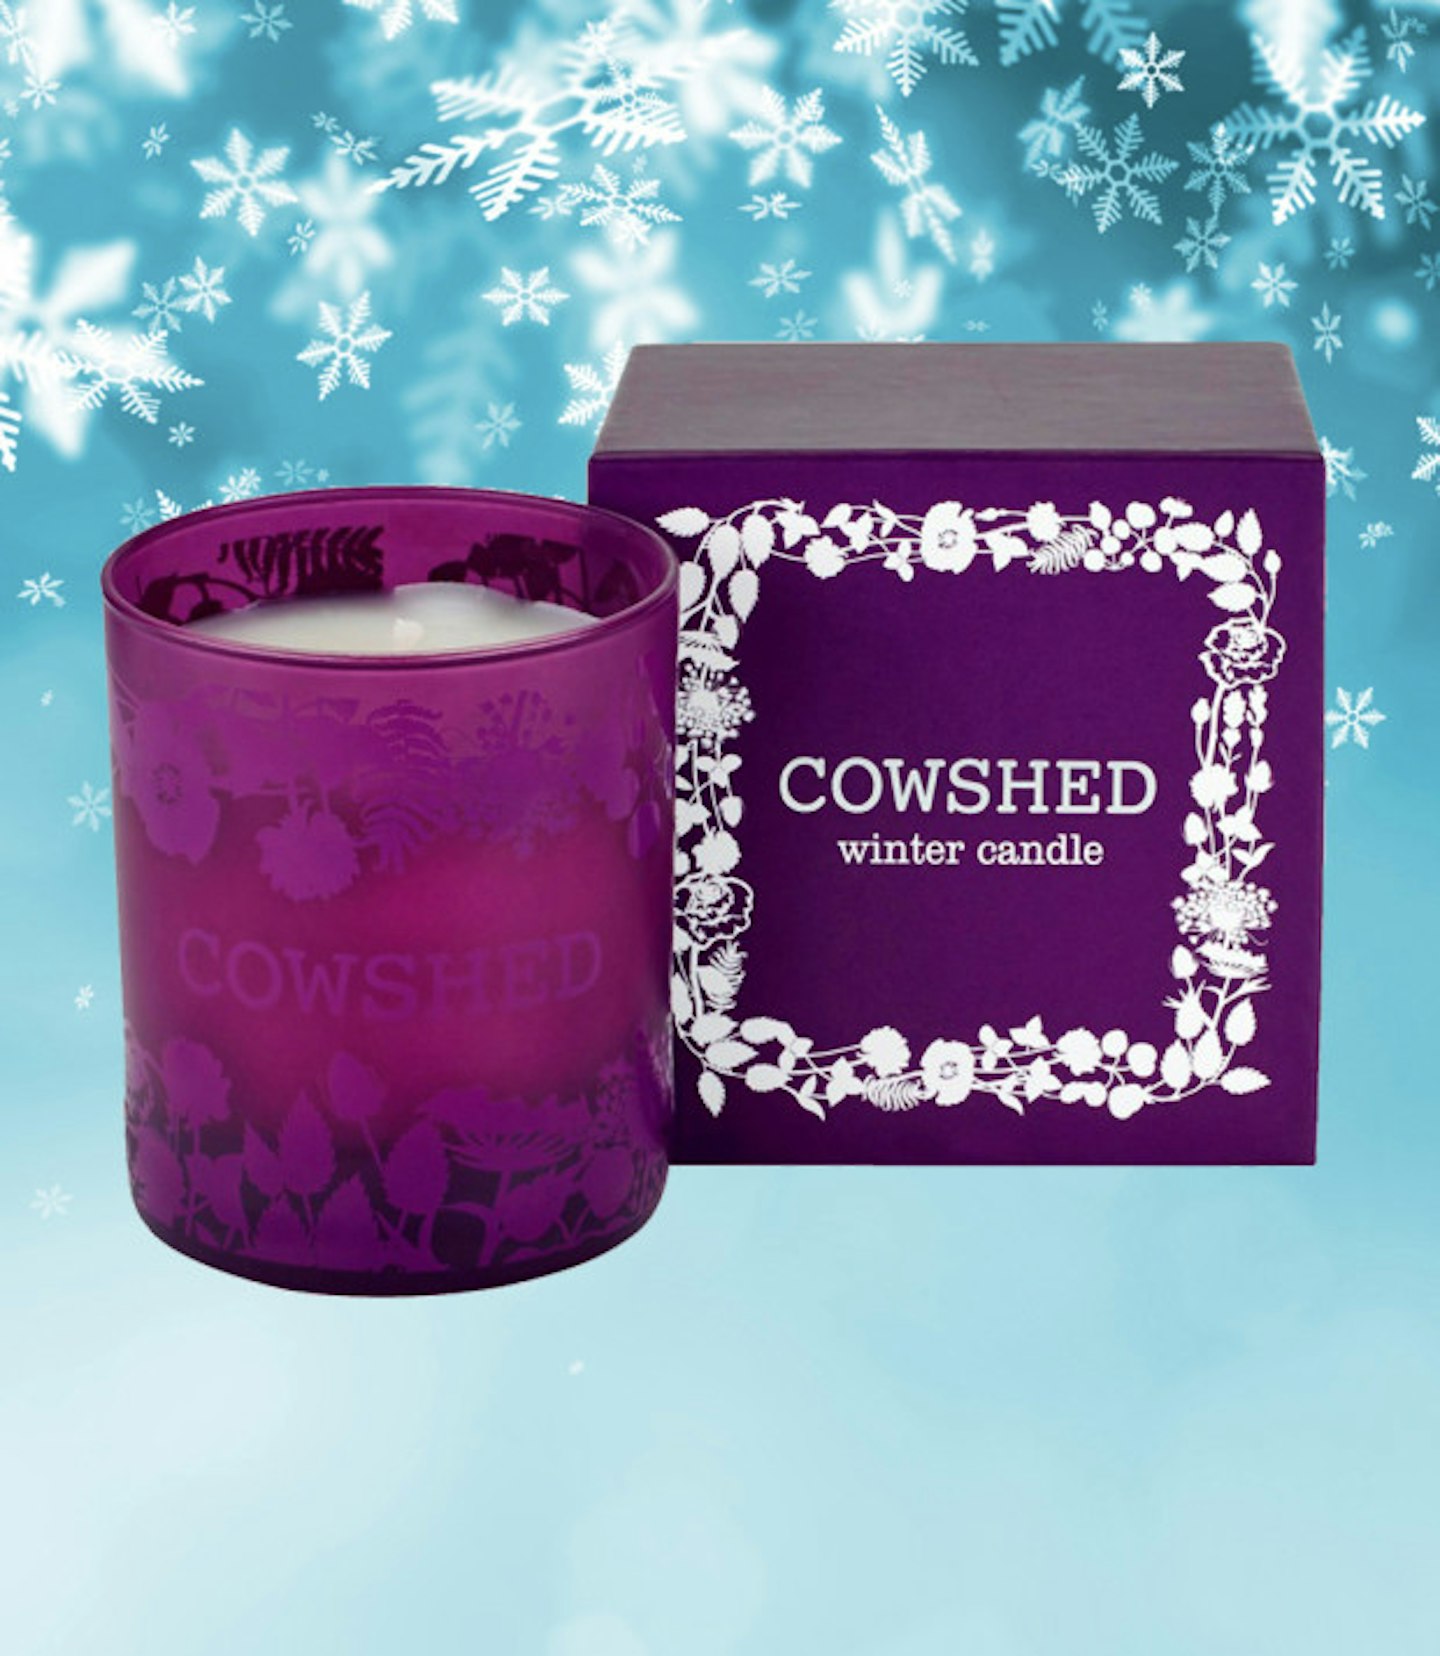 christmas-candles-cowshed-winter-candle